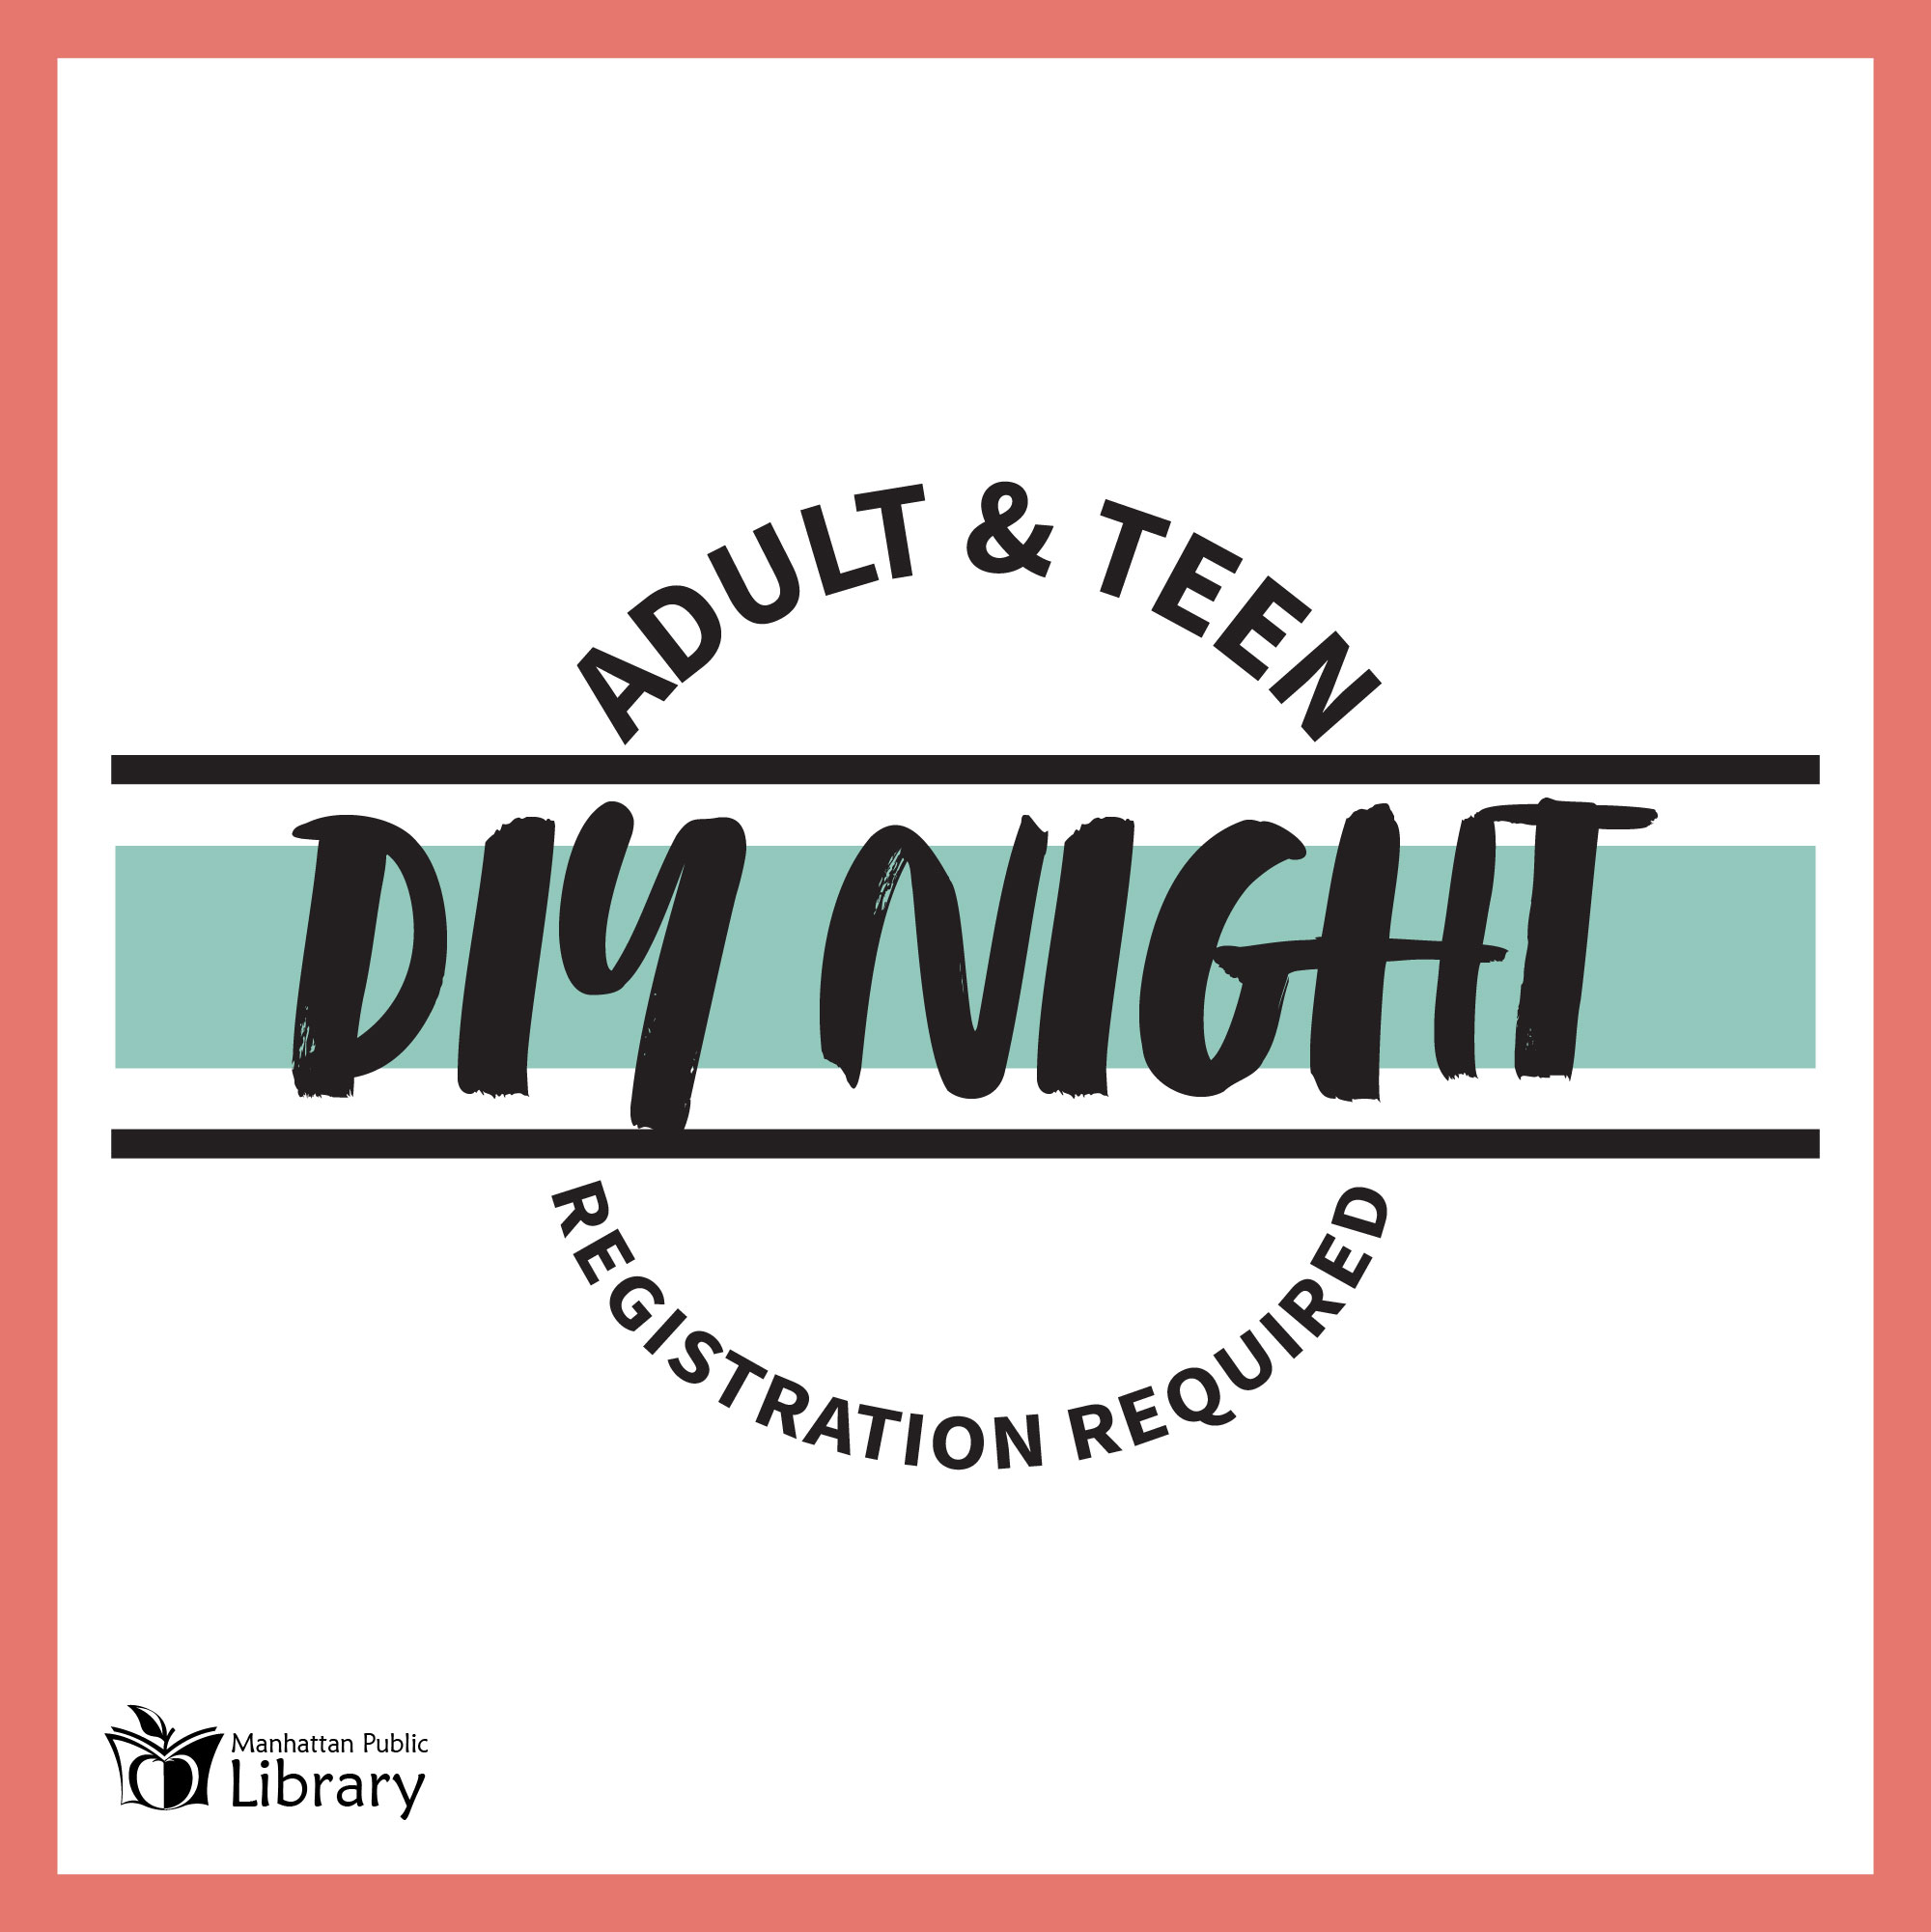 Adult & Teen DIY Night: Registration required